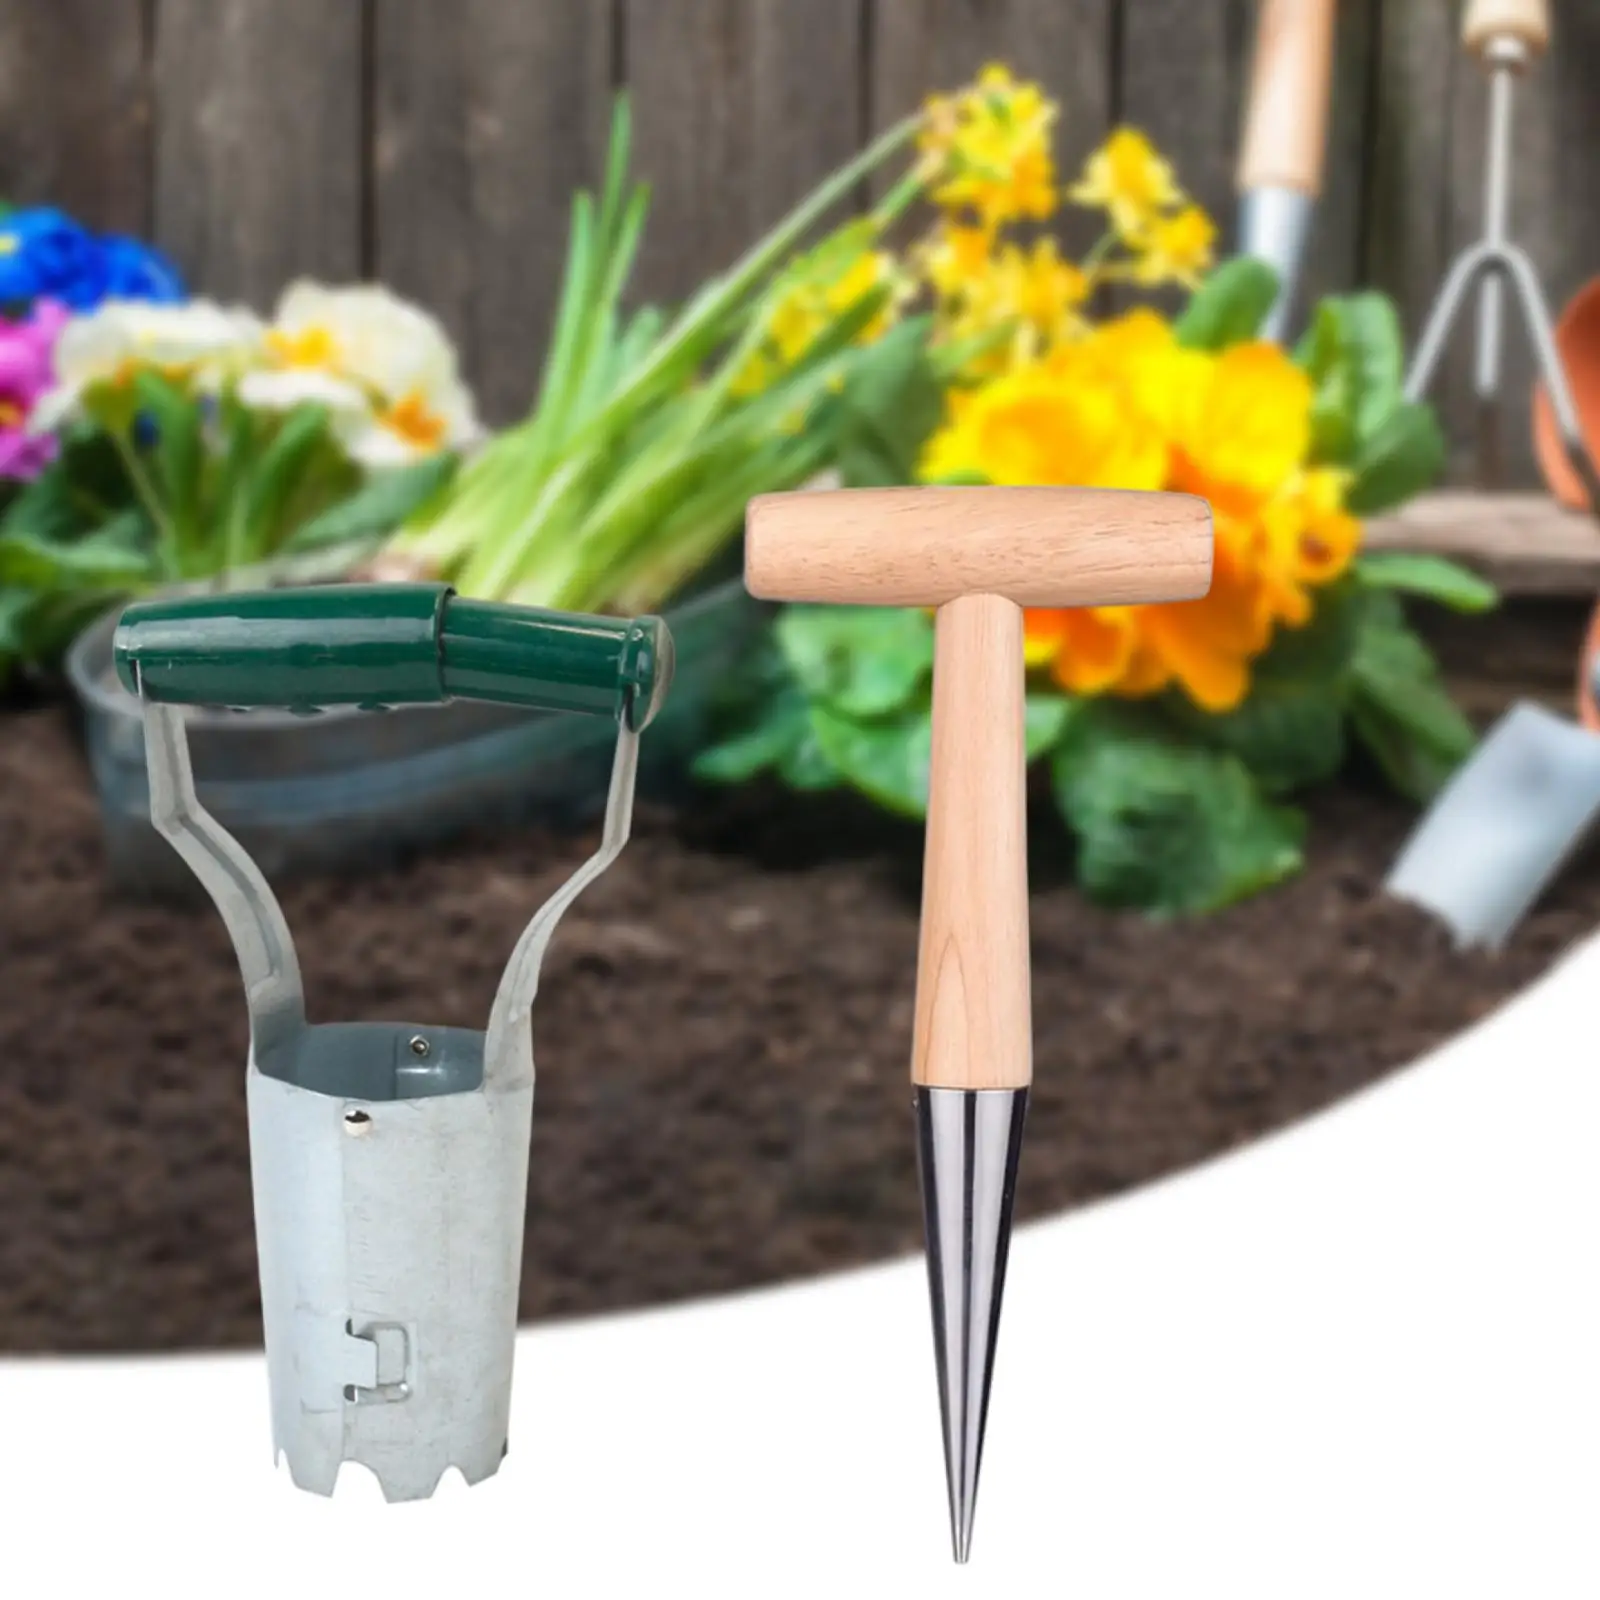 2x s and Bulb Tools Automatic Soil Release Seed Planter Tool Hand